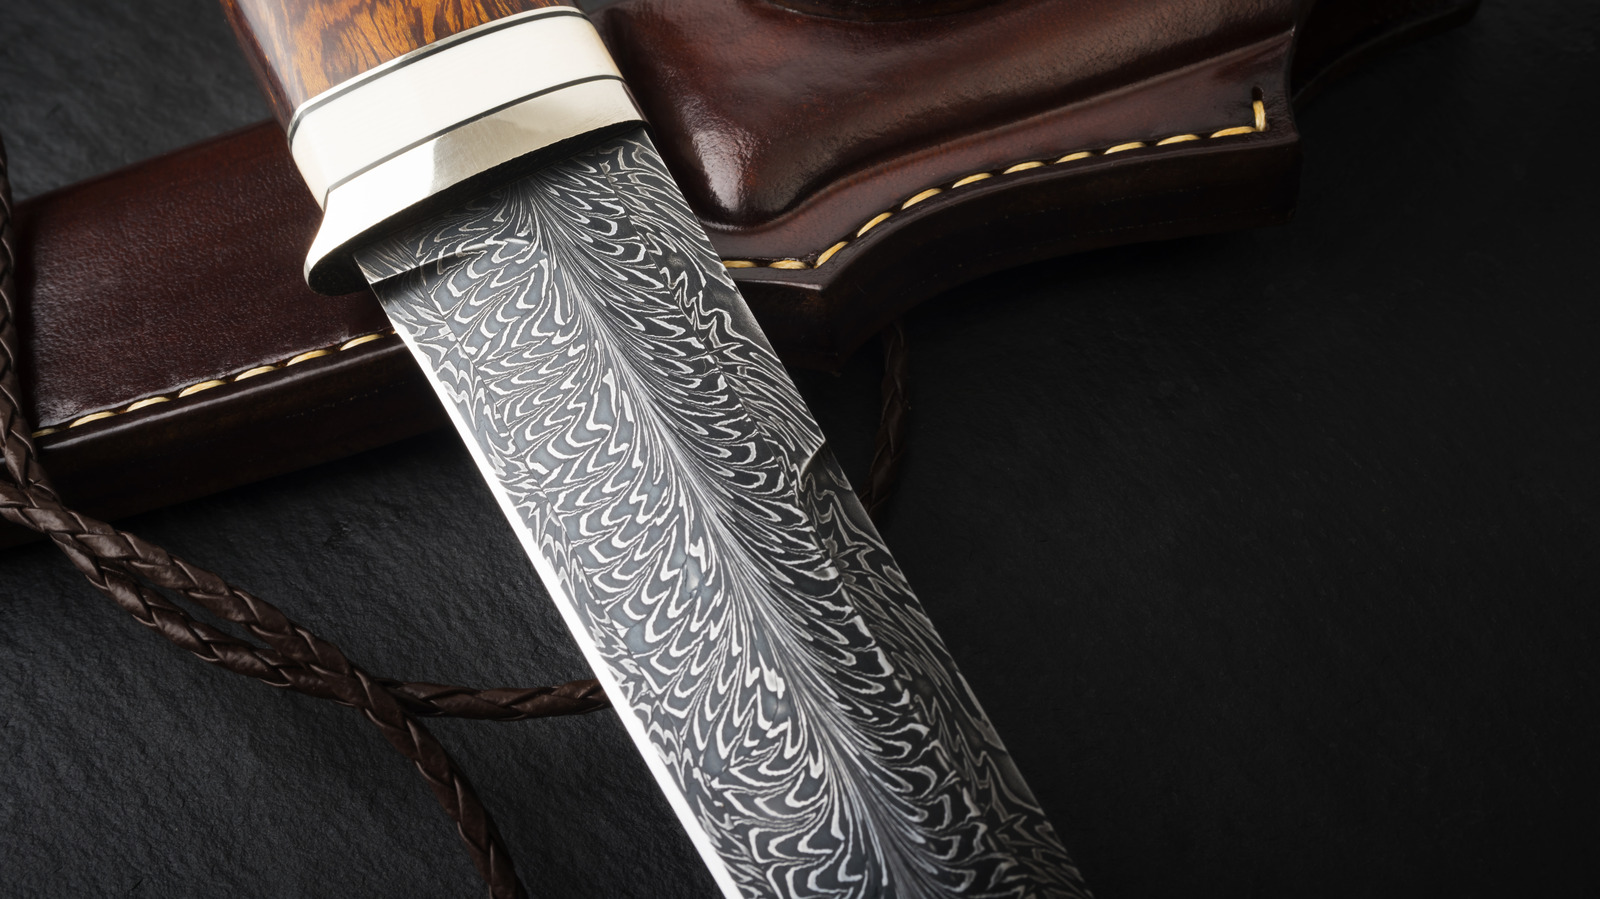 https://www.foodrepublic.com/img/gallery/what-are-damascus-steel-knives-and-why-does-everybody-want-one/l-intro-1686062478.jpg